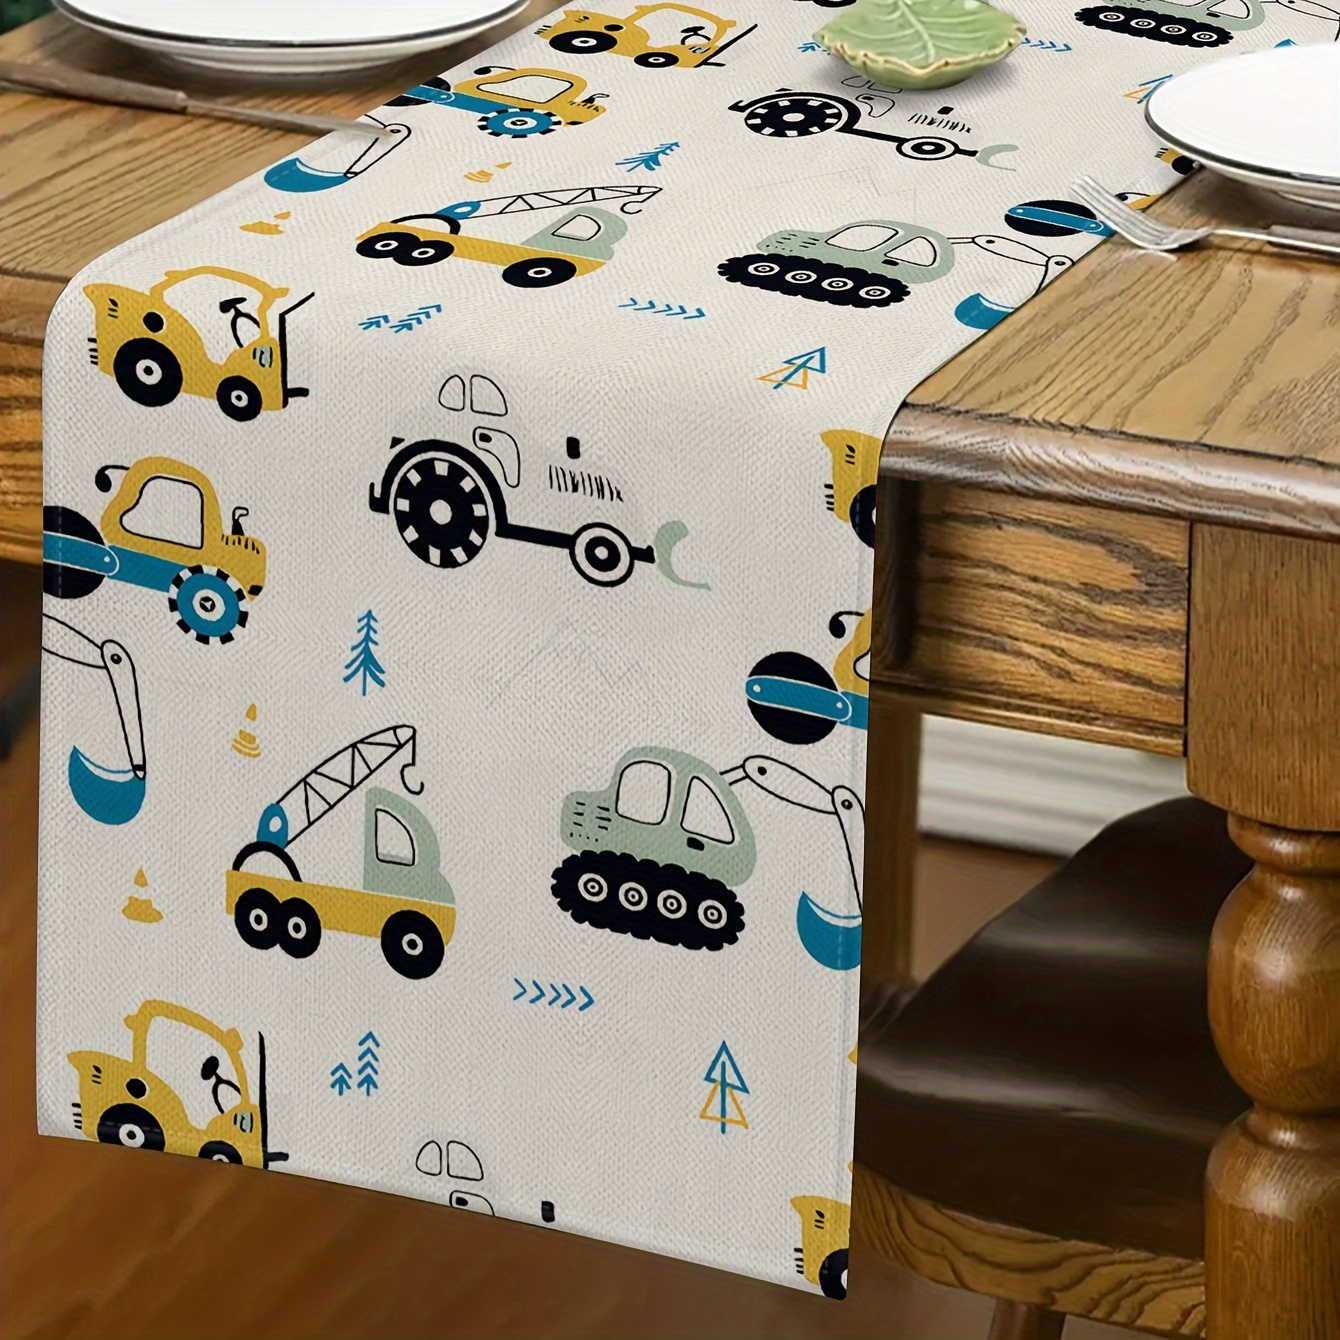 

Charming Cartoon Construction Vehicle Table Runner - Durable Linen, Perfect For Home Dining & Parties, 13x72 Inches